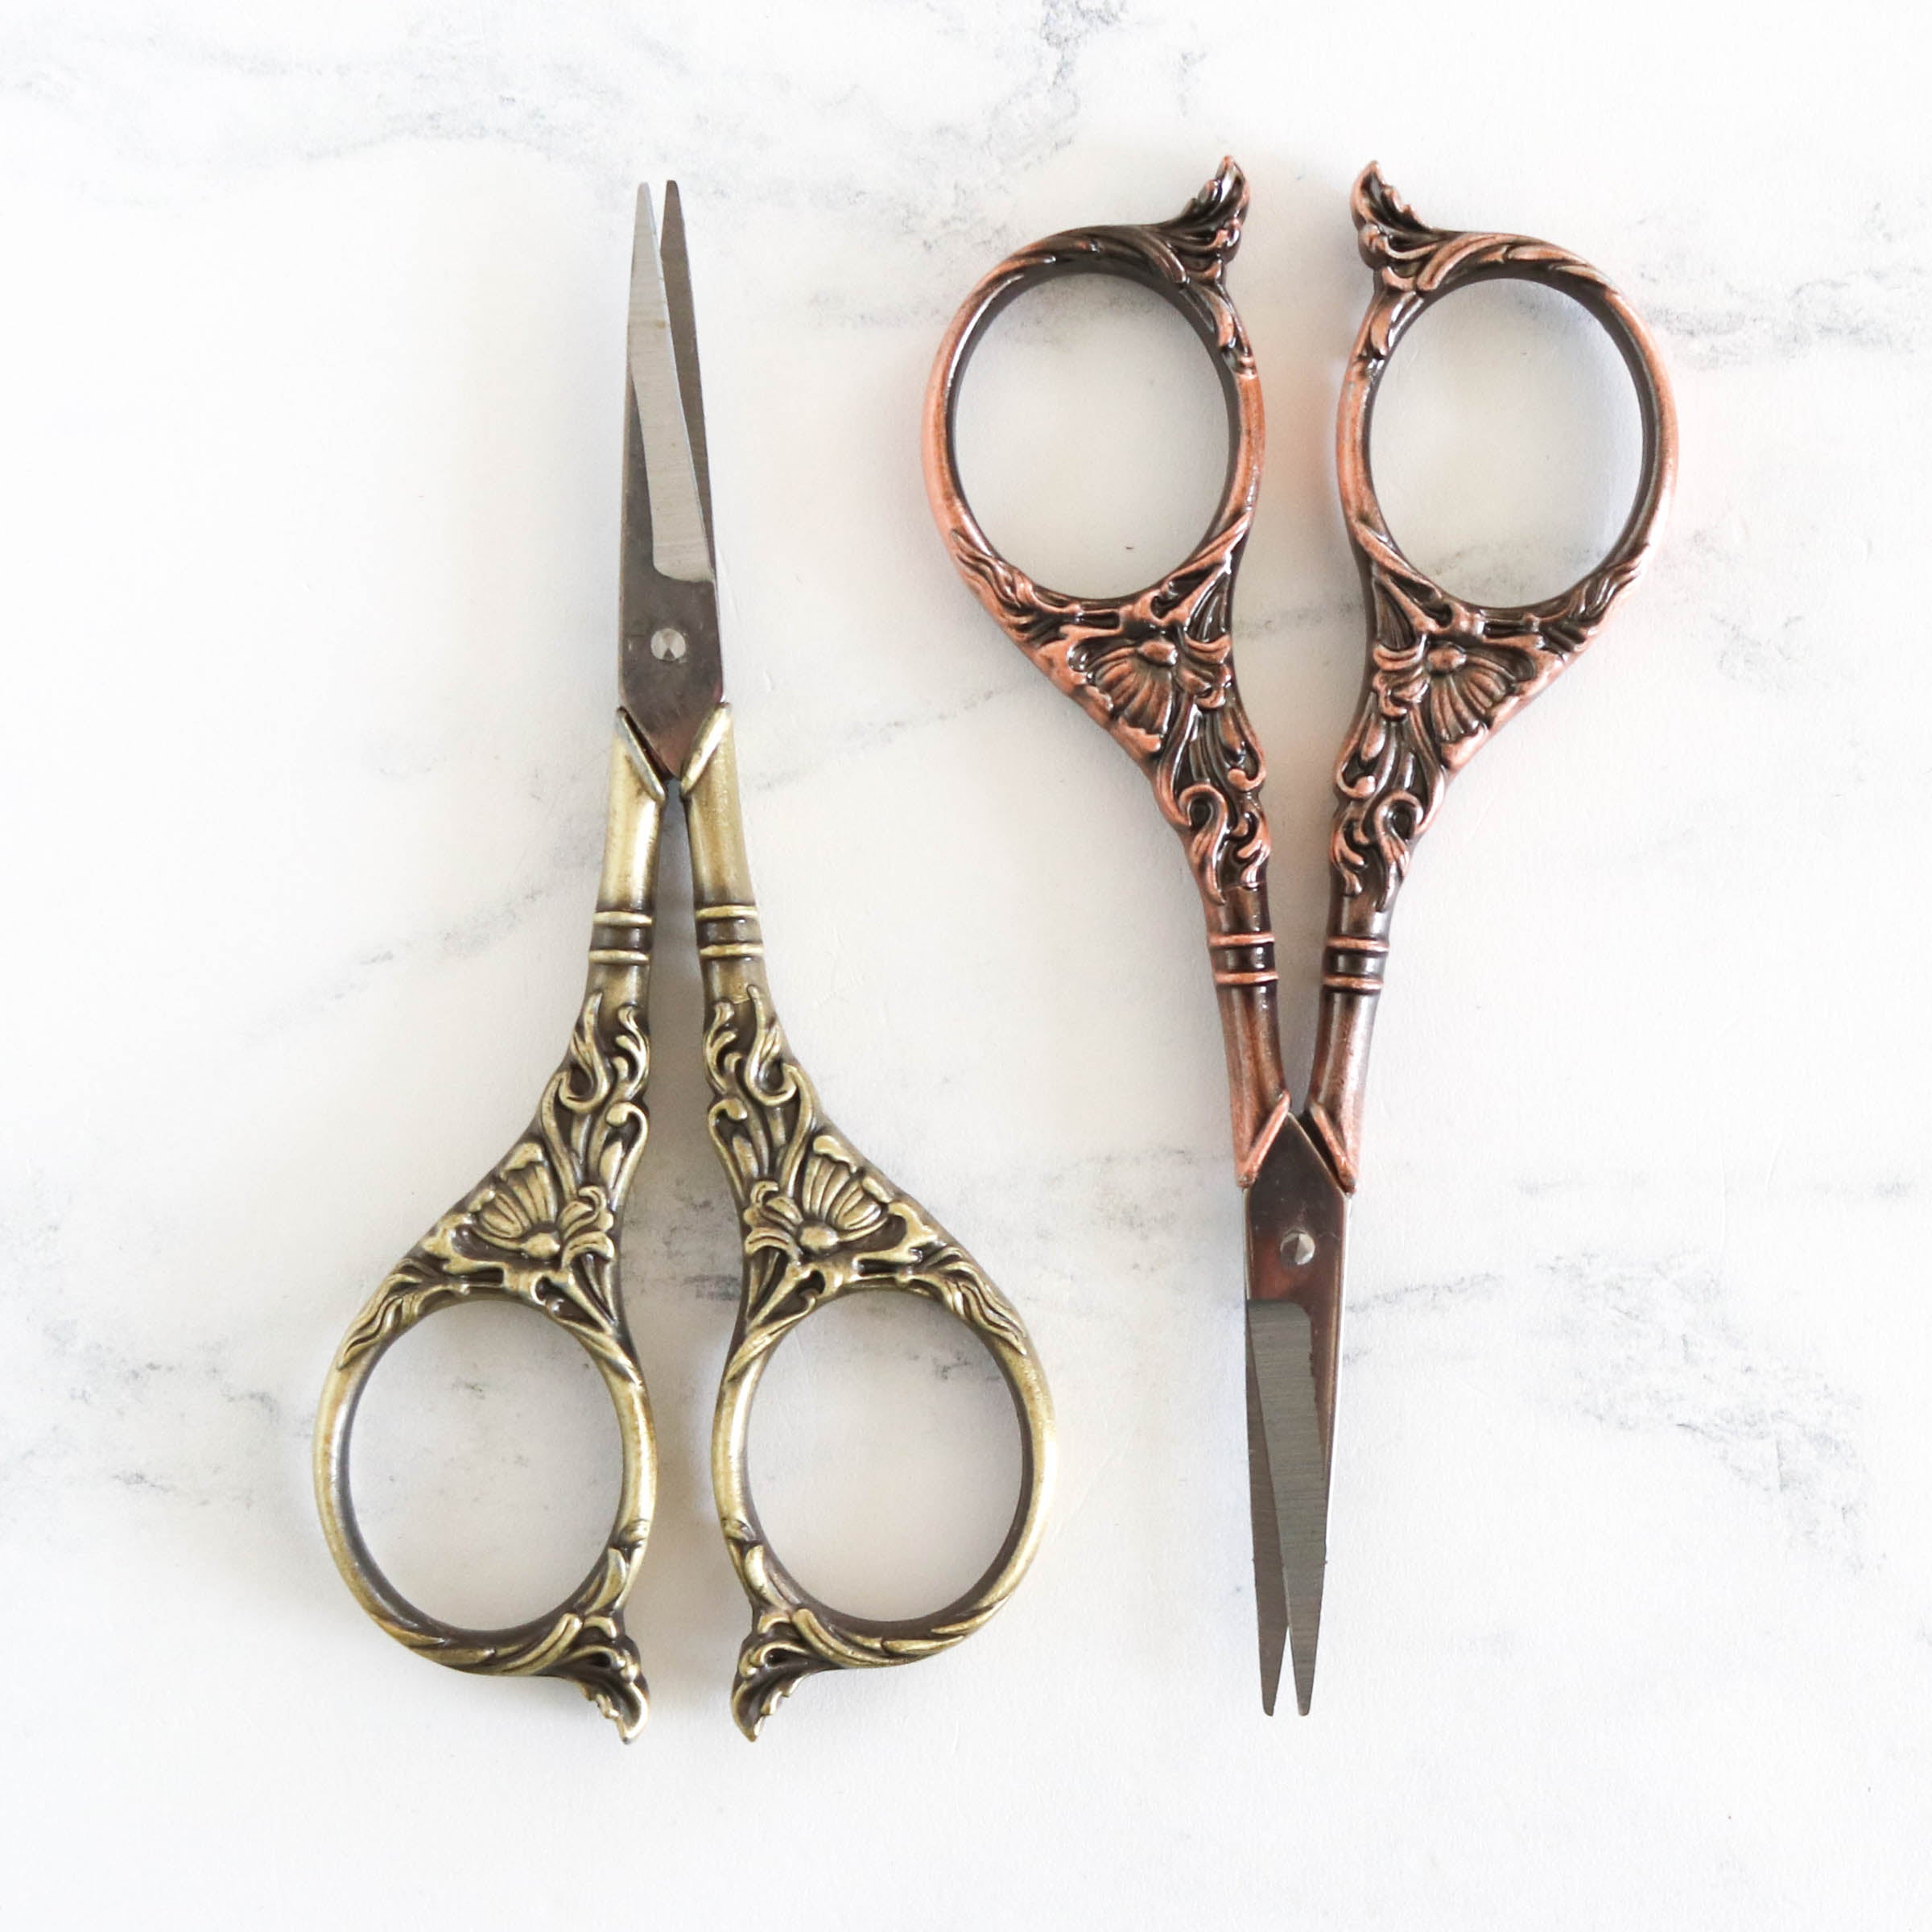 Sublime Stitching Prismatic Mirror Embroidery Scissors